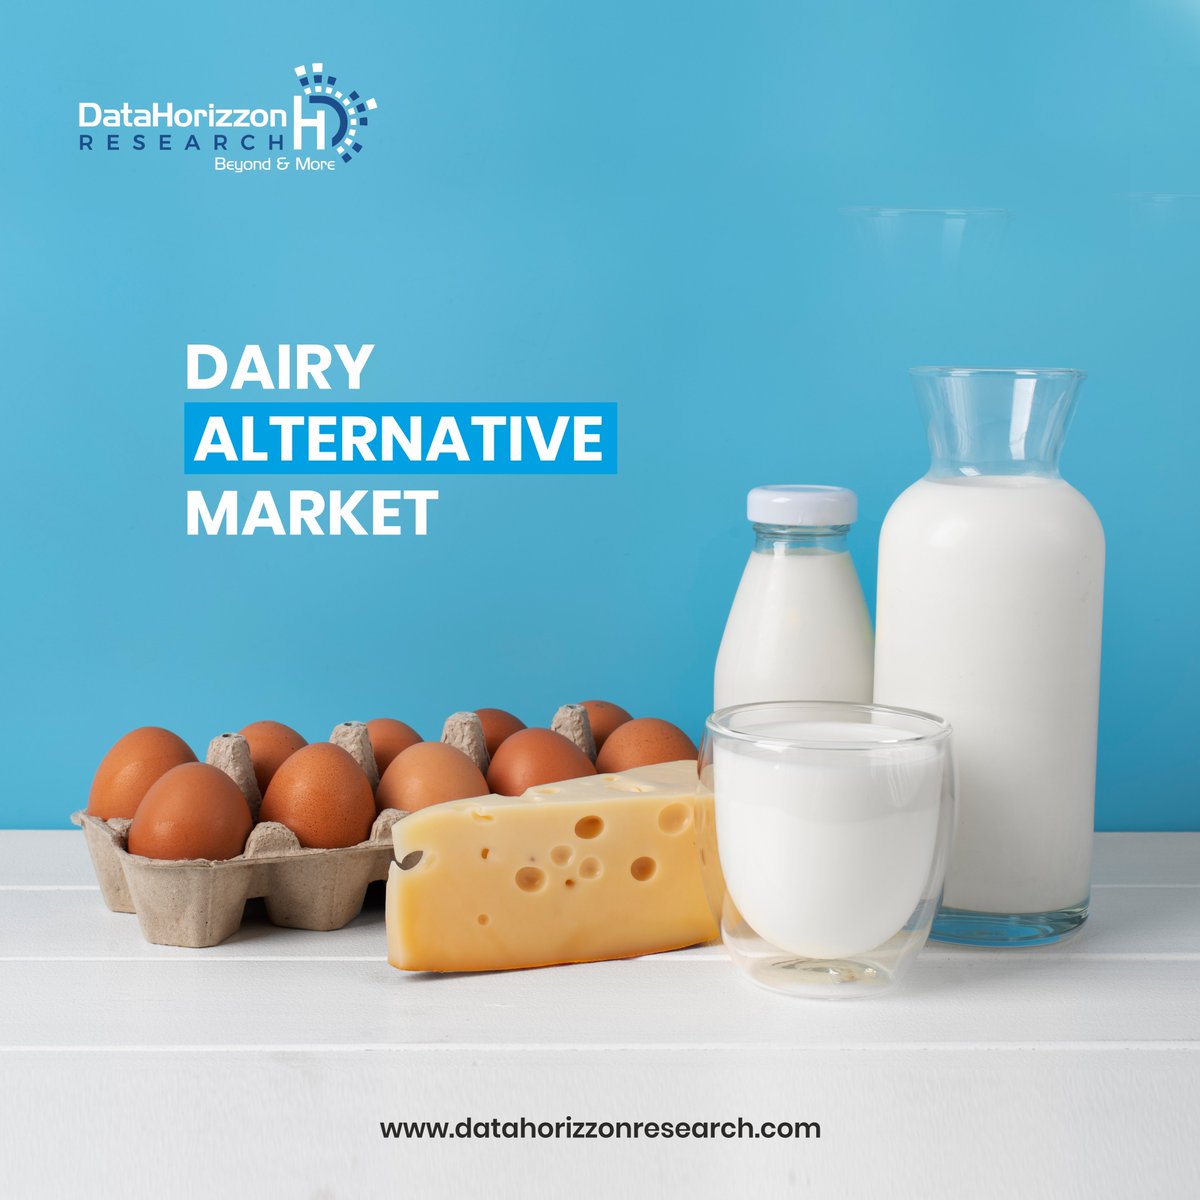 The dairy alternative market is booming! With more people seeking plant-based options for health, ethical, and environmental reasons, there's never been a better time to try out some delicious alternatives. 
#dairyfree #vegan #plantbased #dairyalternatives #veganfood #veganism